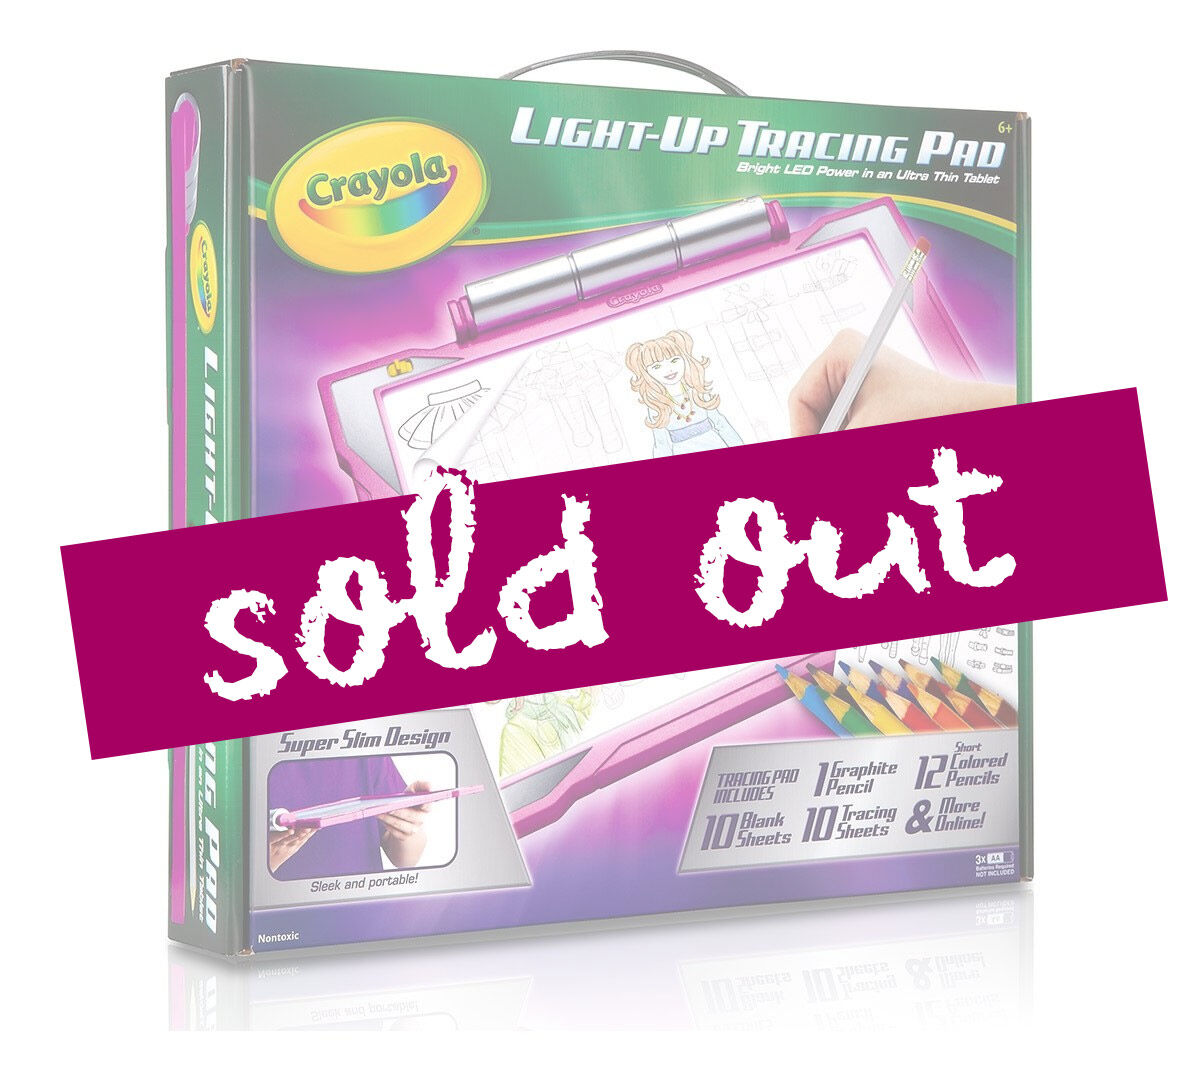 crayola-light-up-tracing-pad-pink-art-tool-bright-leds-easy-tracing-with-1-pencil-12